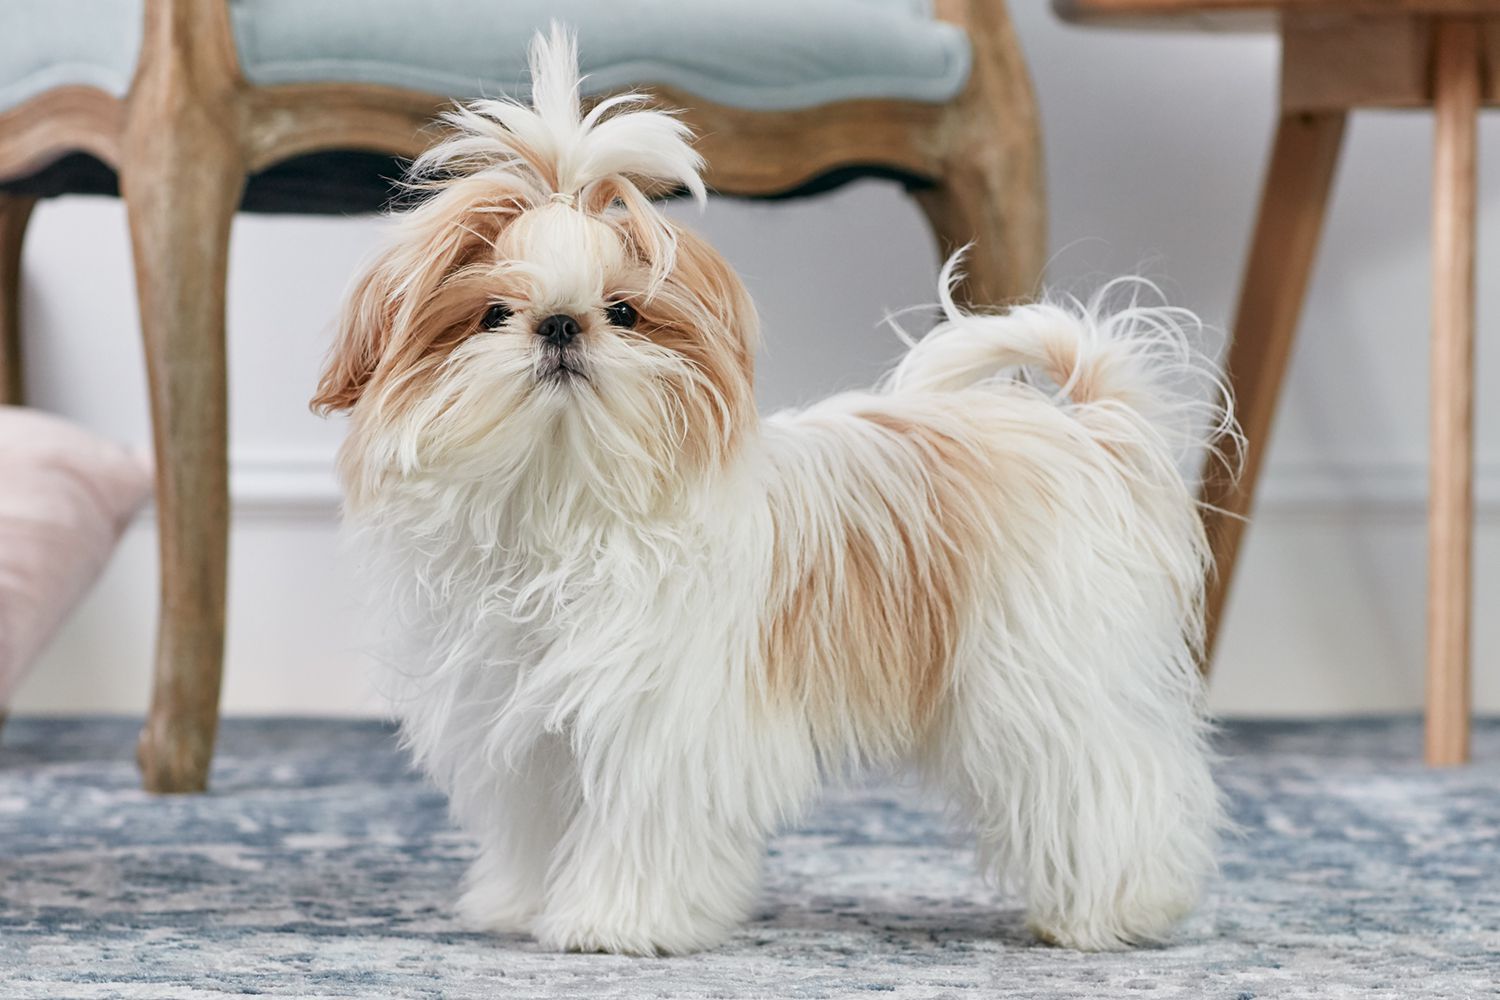 Shih Tzu are excellent beautiful dogs